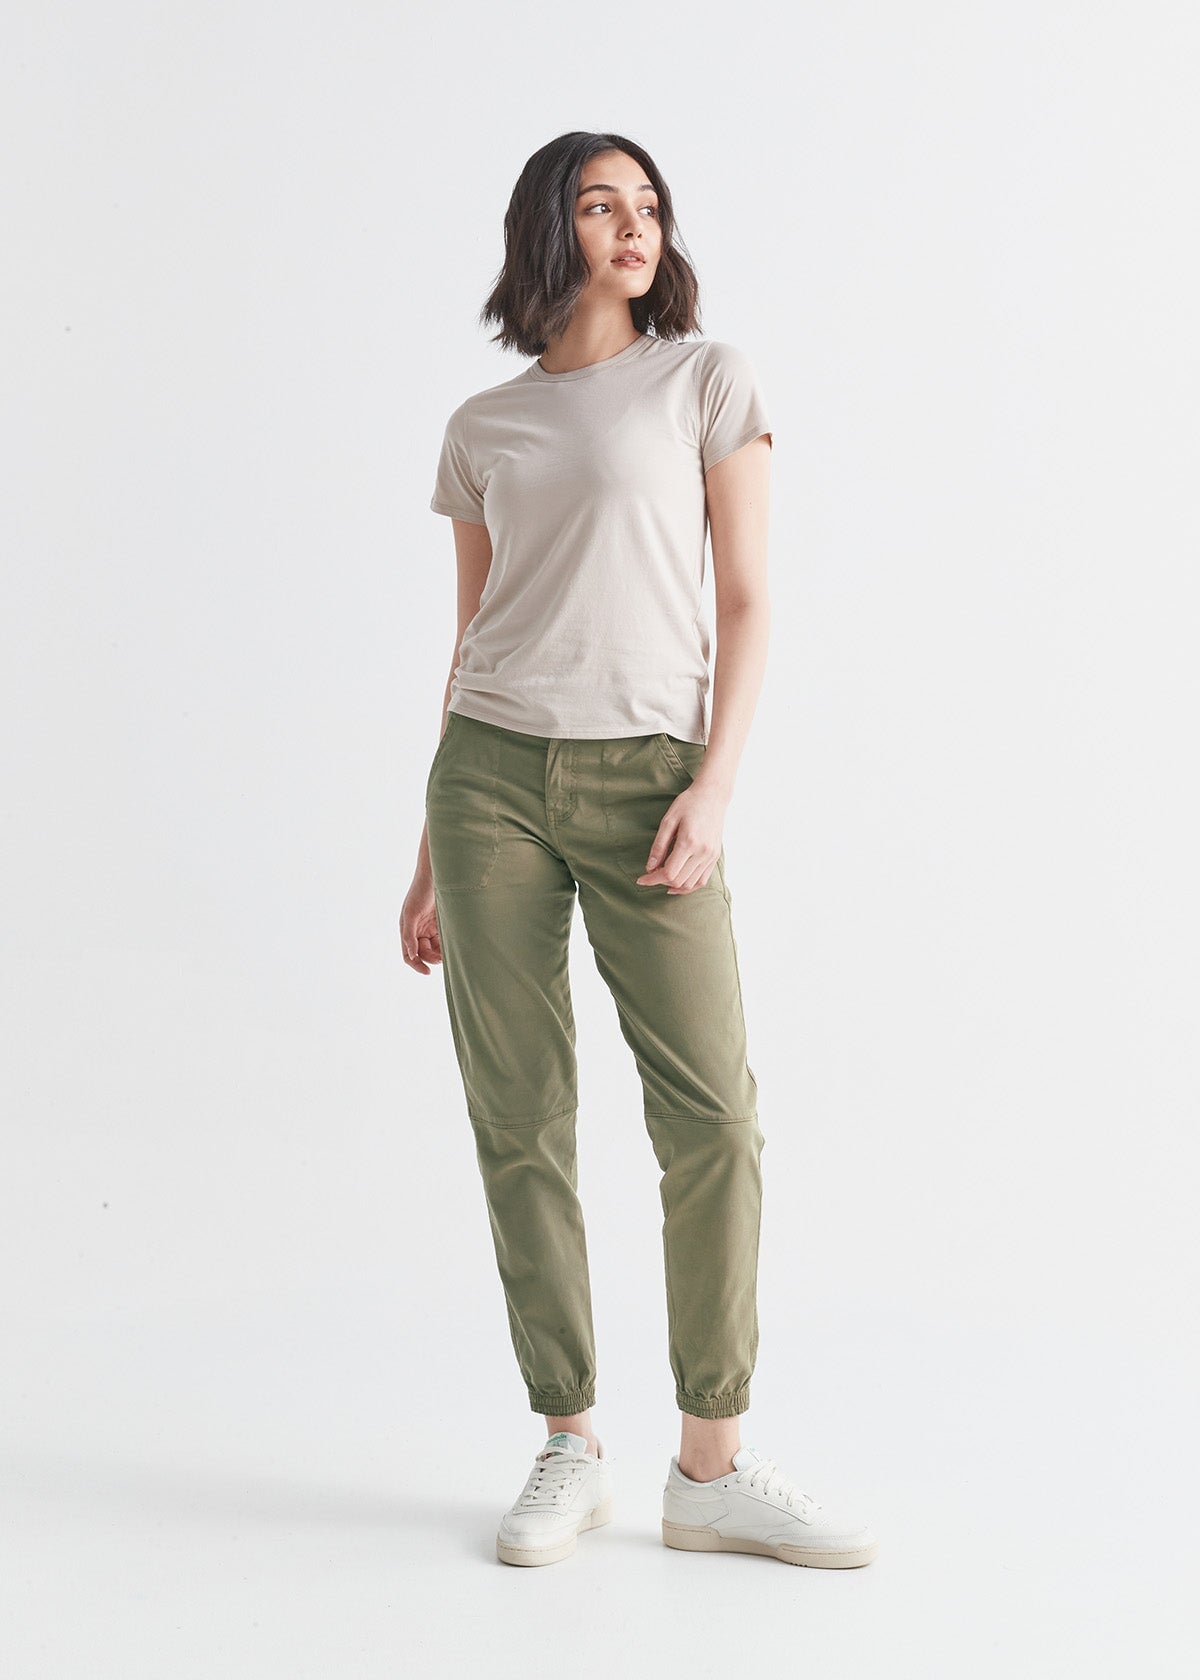 Buy The Label Life Olive Green Cargo Pants online